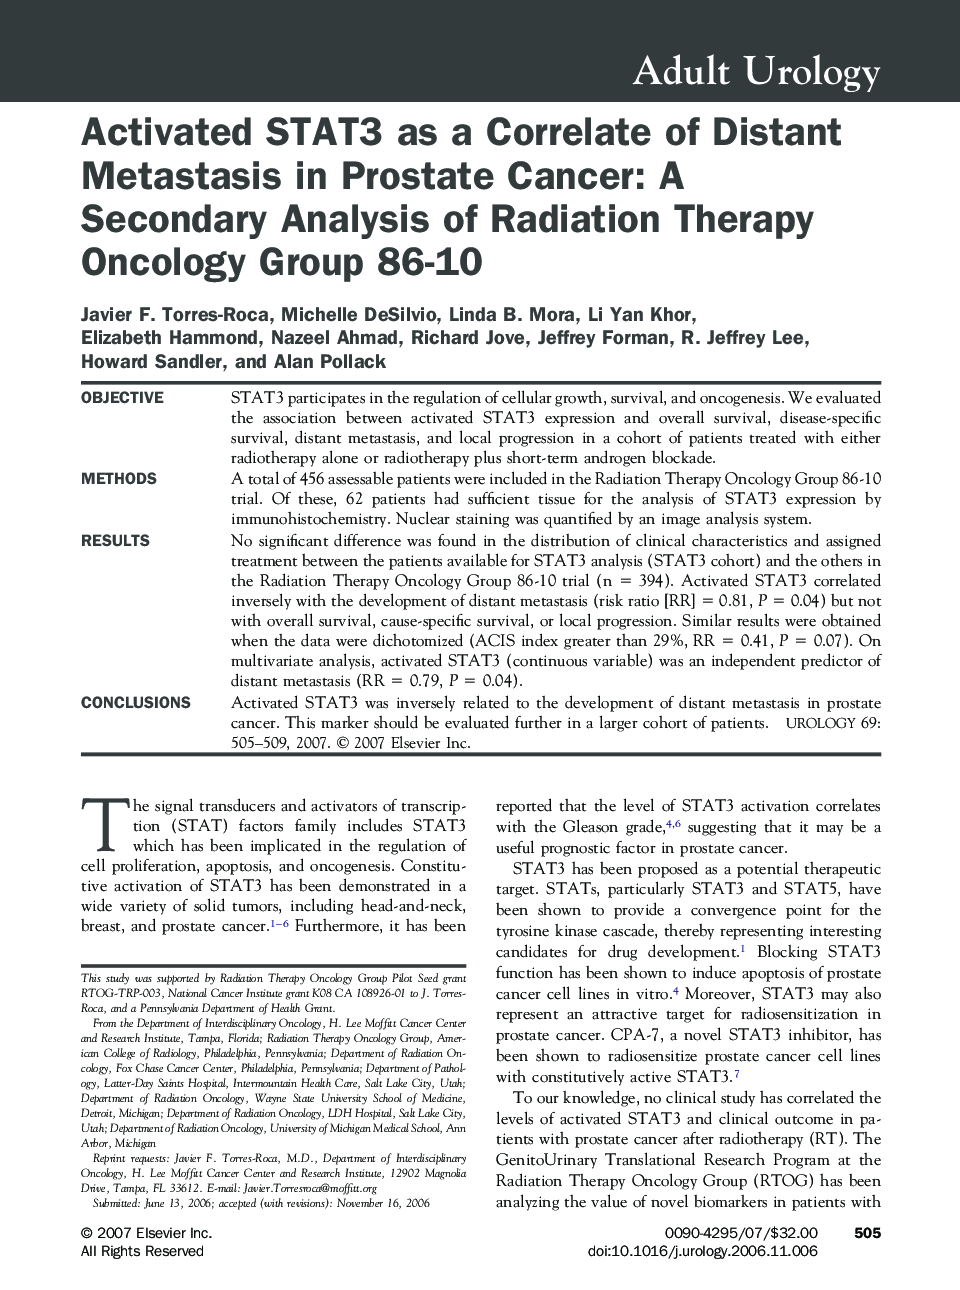 Activated STAT3 as a Correlate of Distant Metastasis in Prostate Cancer: A Secondary Analysis of Radiation Therapy Oncology Group 86-10 